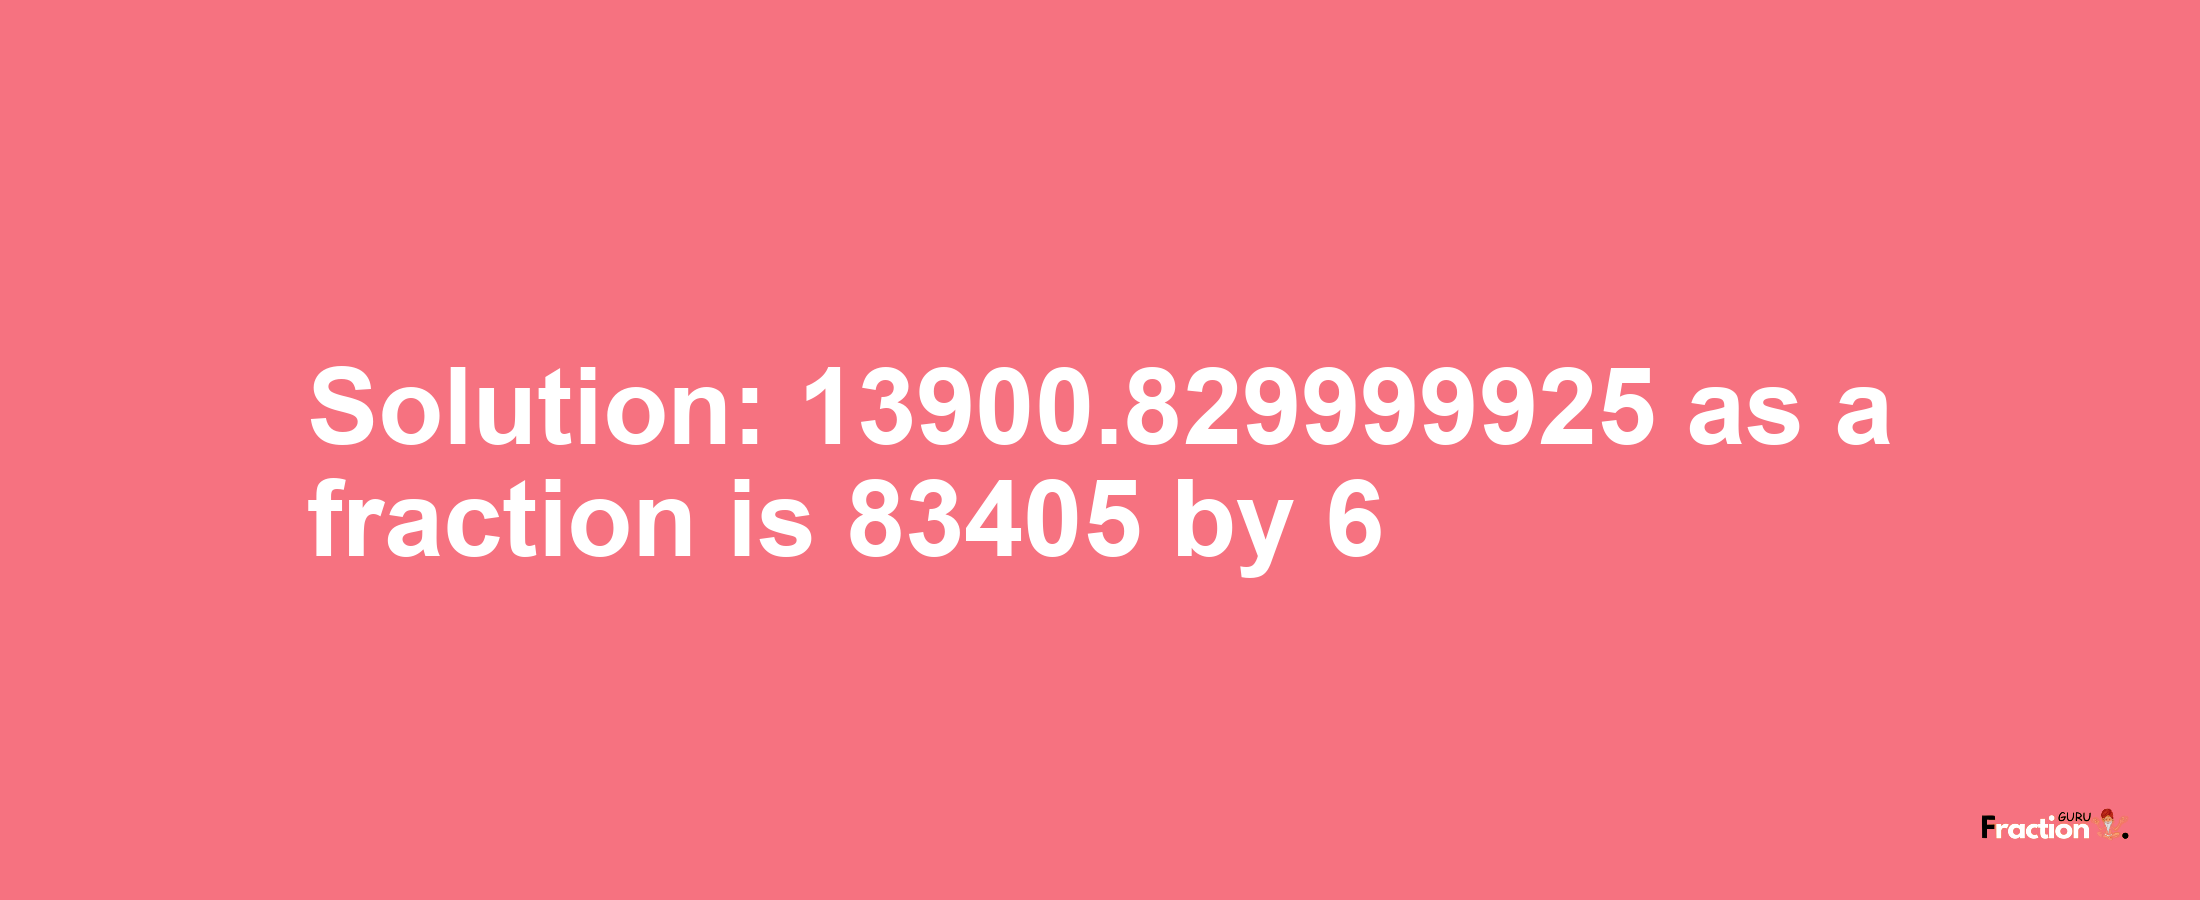 Solution:13900.829999925 as a fraction is 83405/6